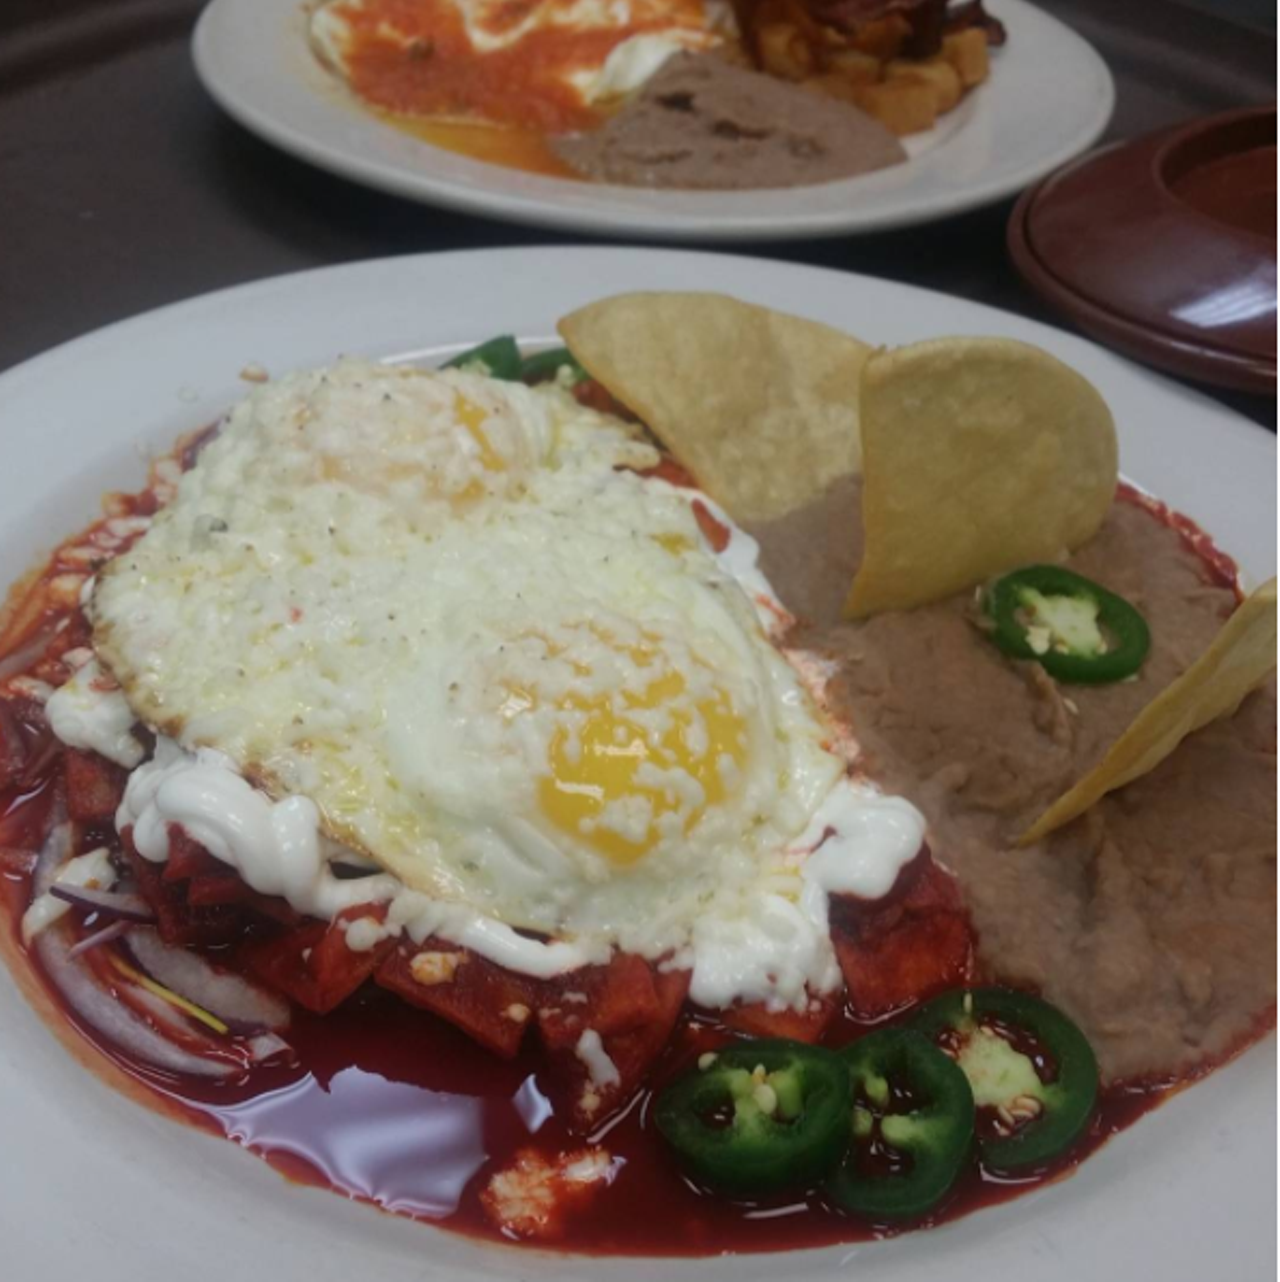 Aldaco&#146;s Mexican Cuisine-Stone Oak
20079 Stone Oak Pkwy, (210) 494-0561, aldacosrestaurants.com
How do $4 Bloody Marys and $3 Mimosas sound? Pair them with a breakfast chile relleno or chilaquiles San Antonio with puntas de puerco 11 a.m. to 3 p.m. Saturday and Sunday for a complete brunch experience.
Photo via Instagram, blanca_aldacos